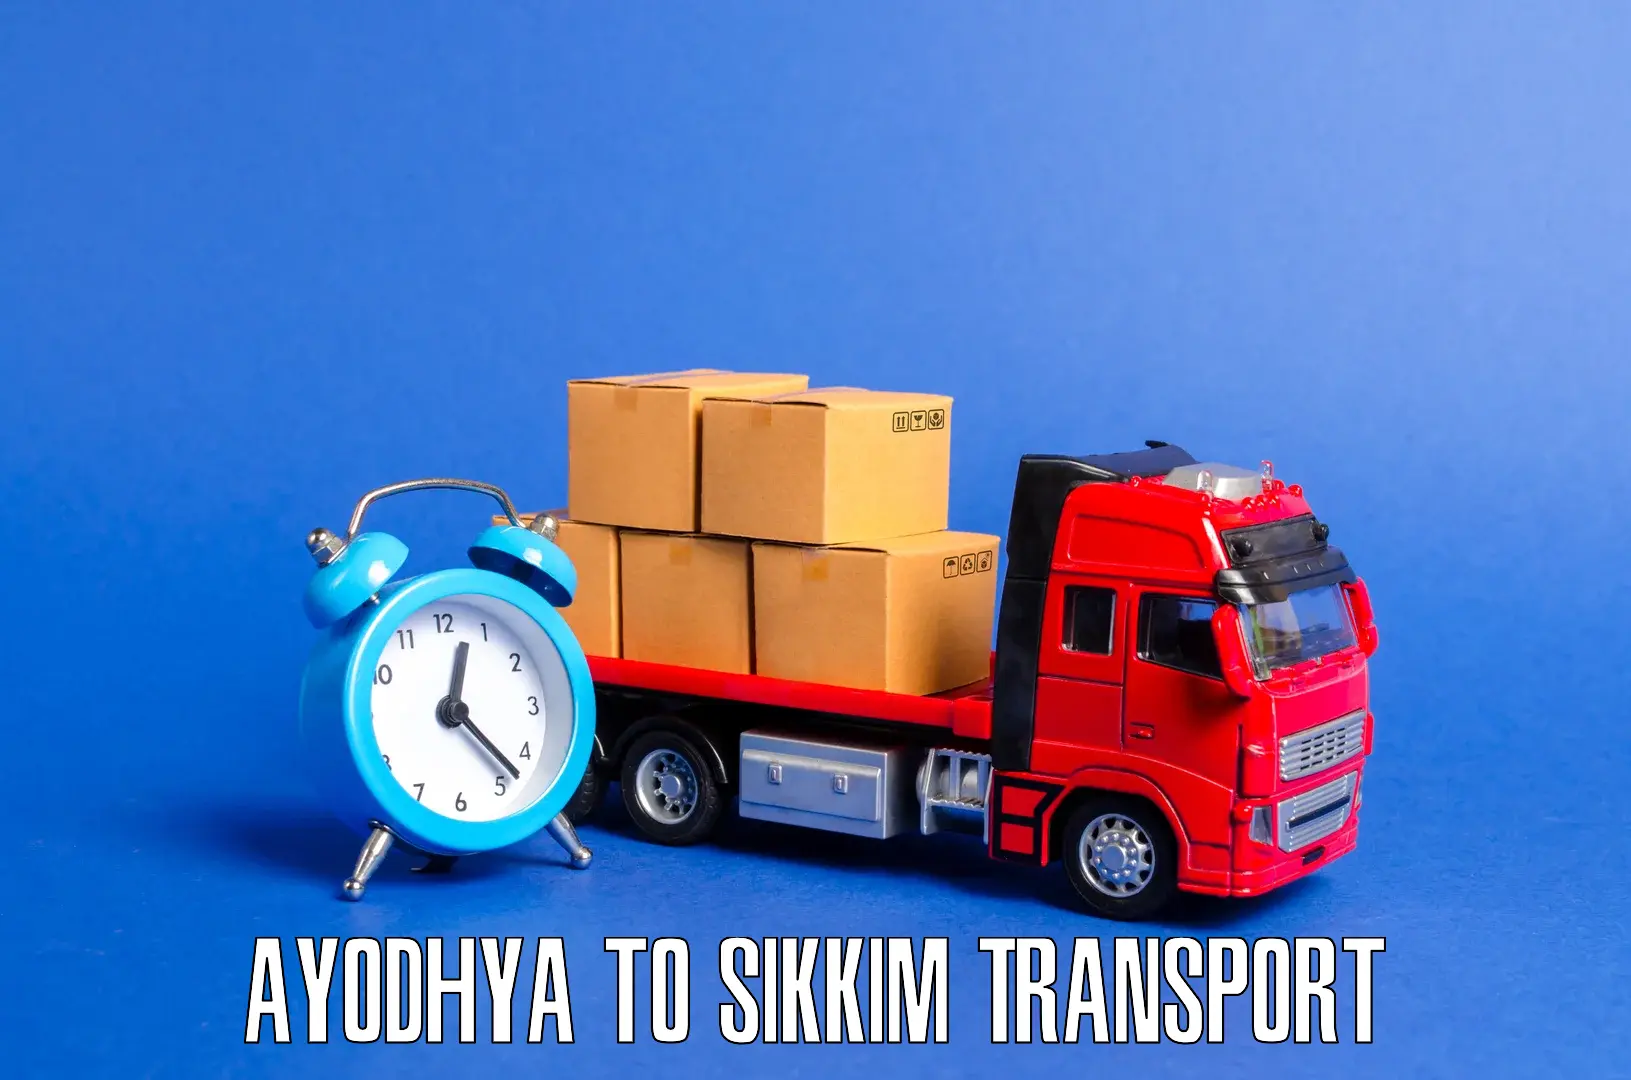 Nearby transport service Ayodhya to Pelling